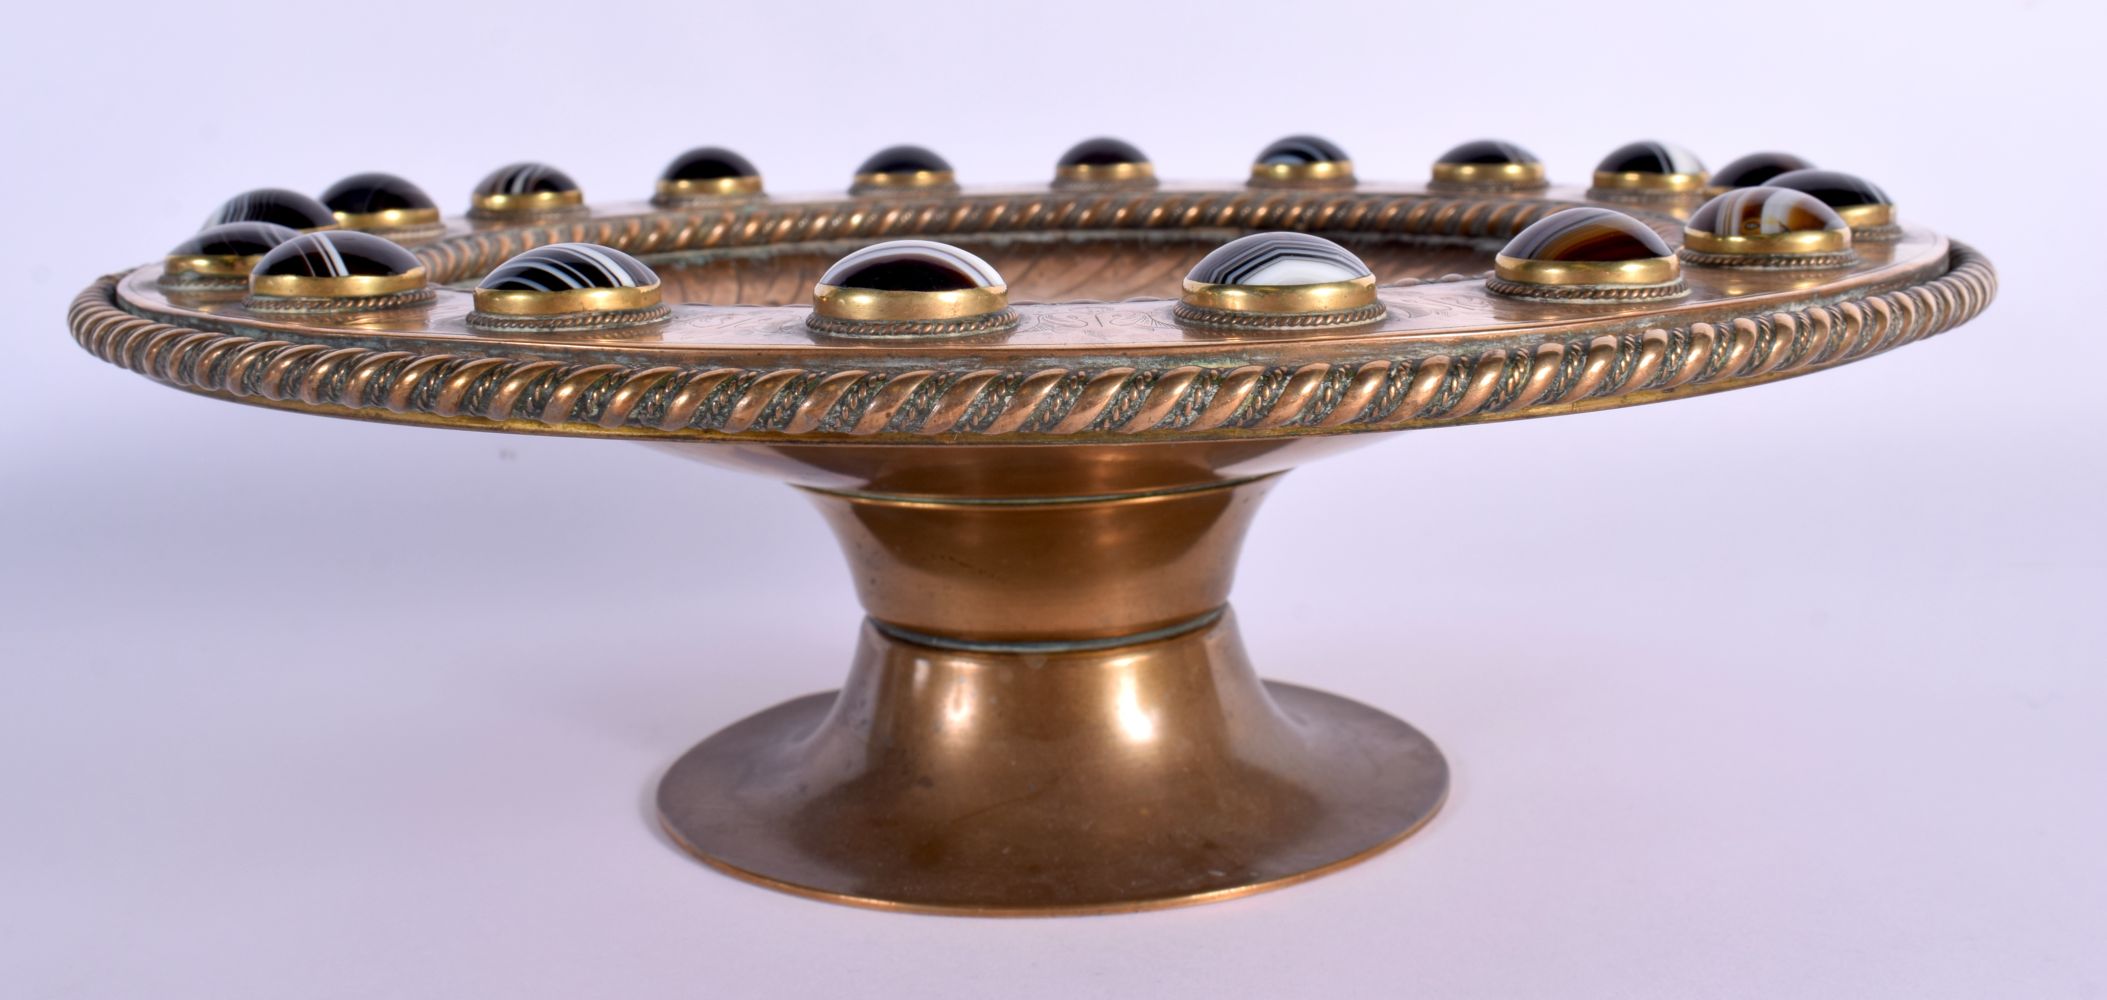 A LOVELY LARGE 19TH CENTURY EUROPEAN AGATE MOUNTED BRONZE TAZZA decorated with foliage. 28 cm x 10 c - Bild 3 aus 8